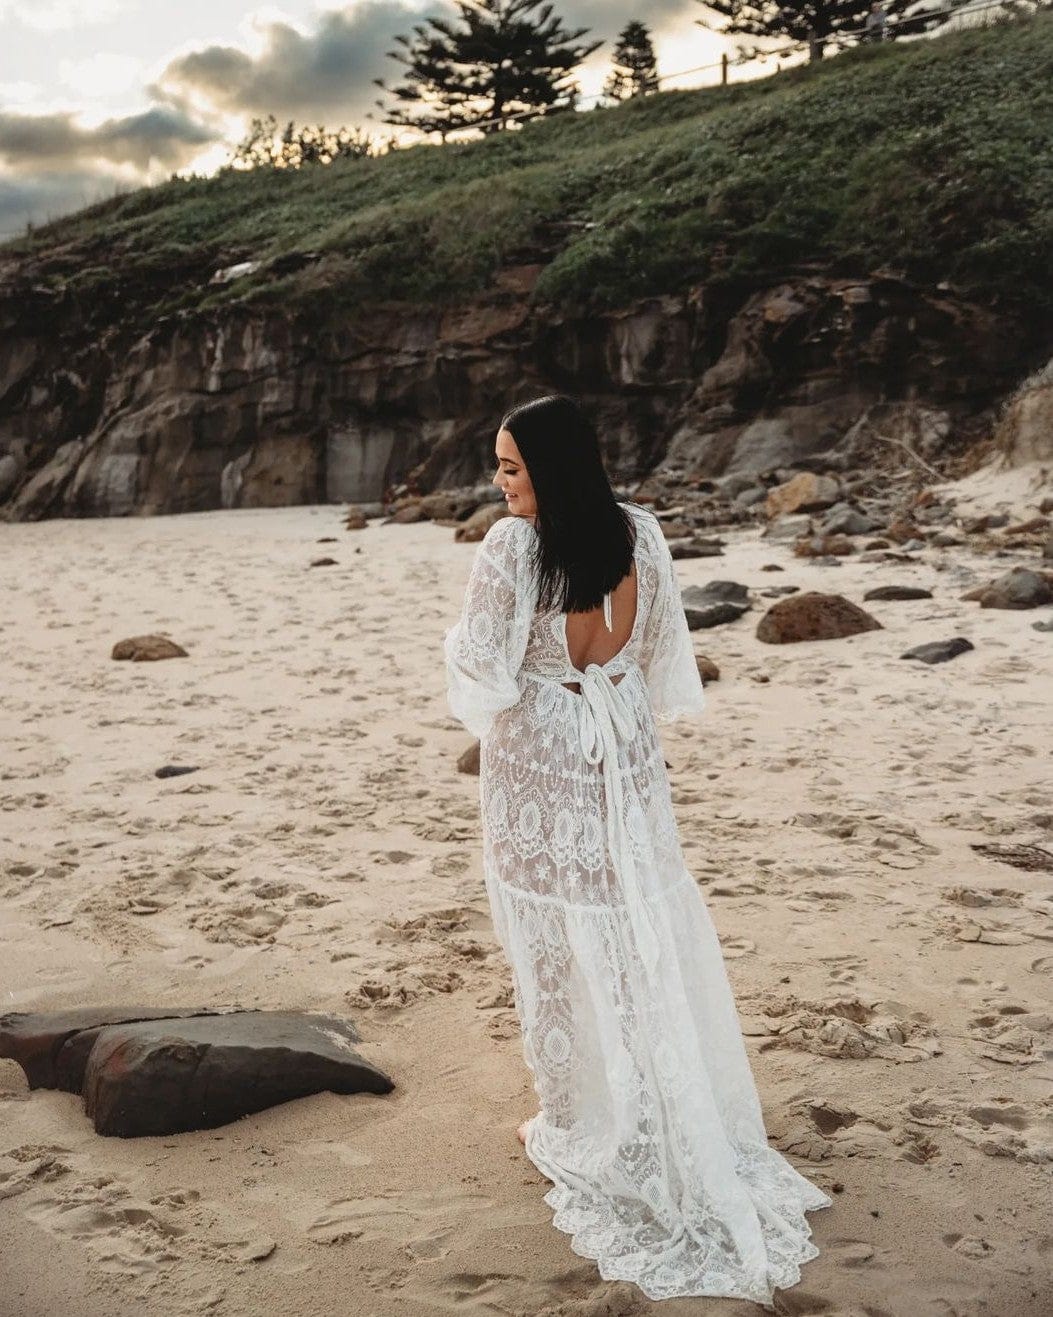 Lace maternity robe worn for maternity beach photoshoot